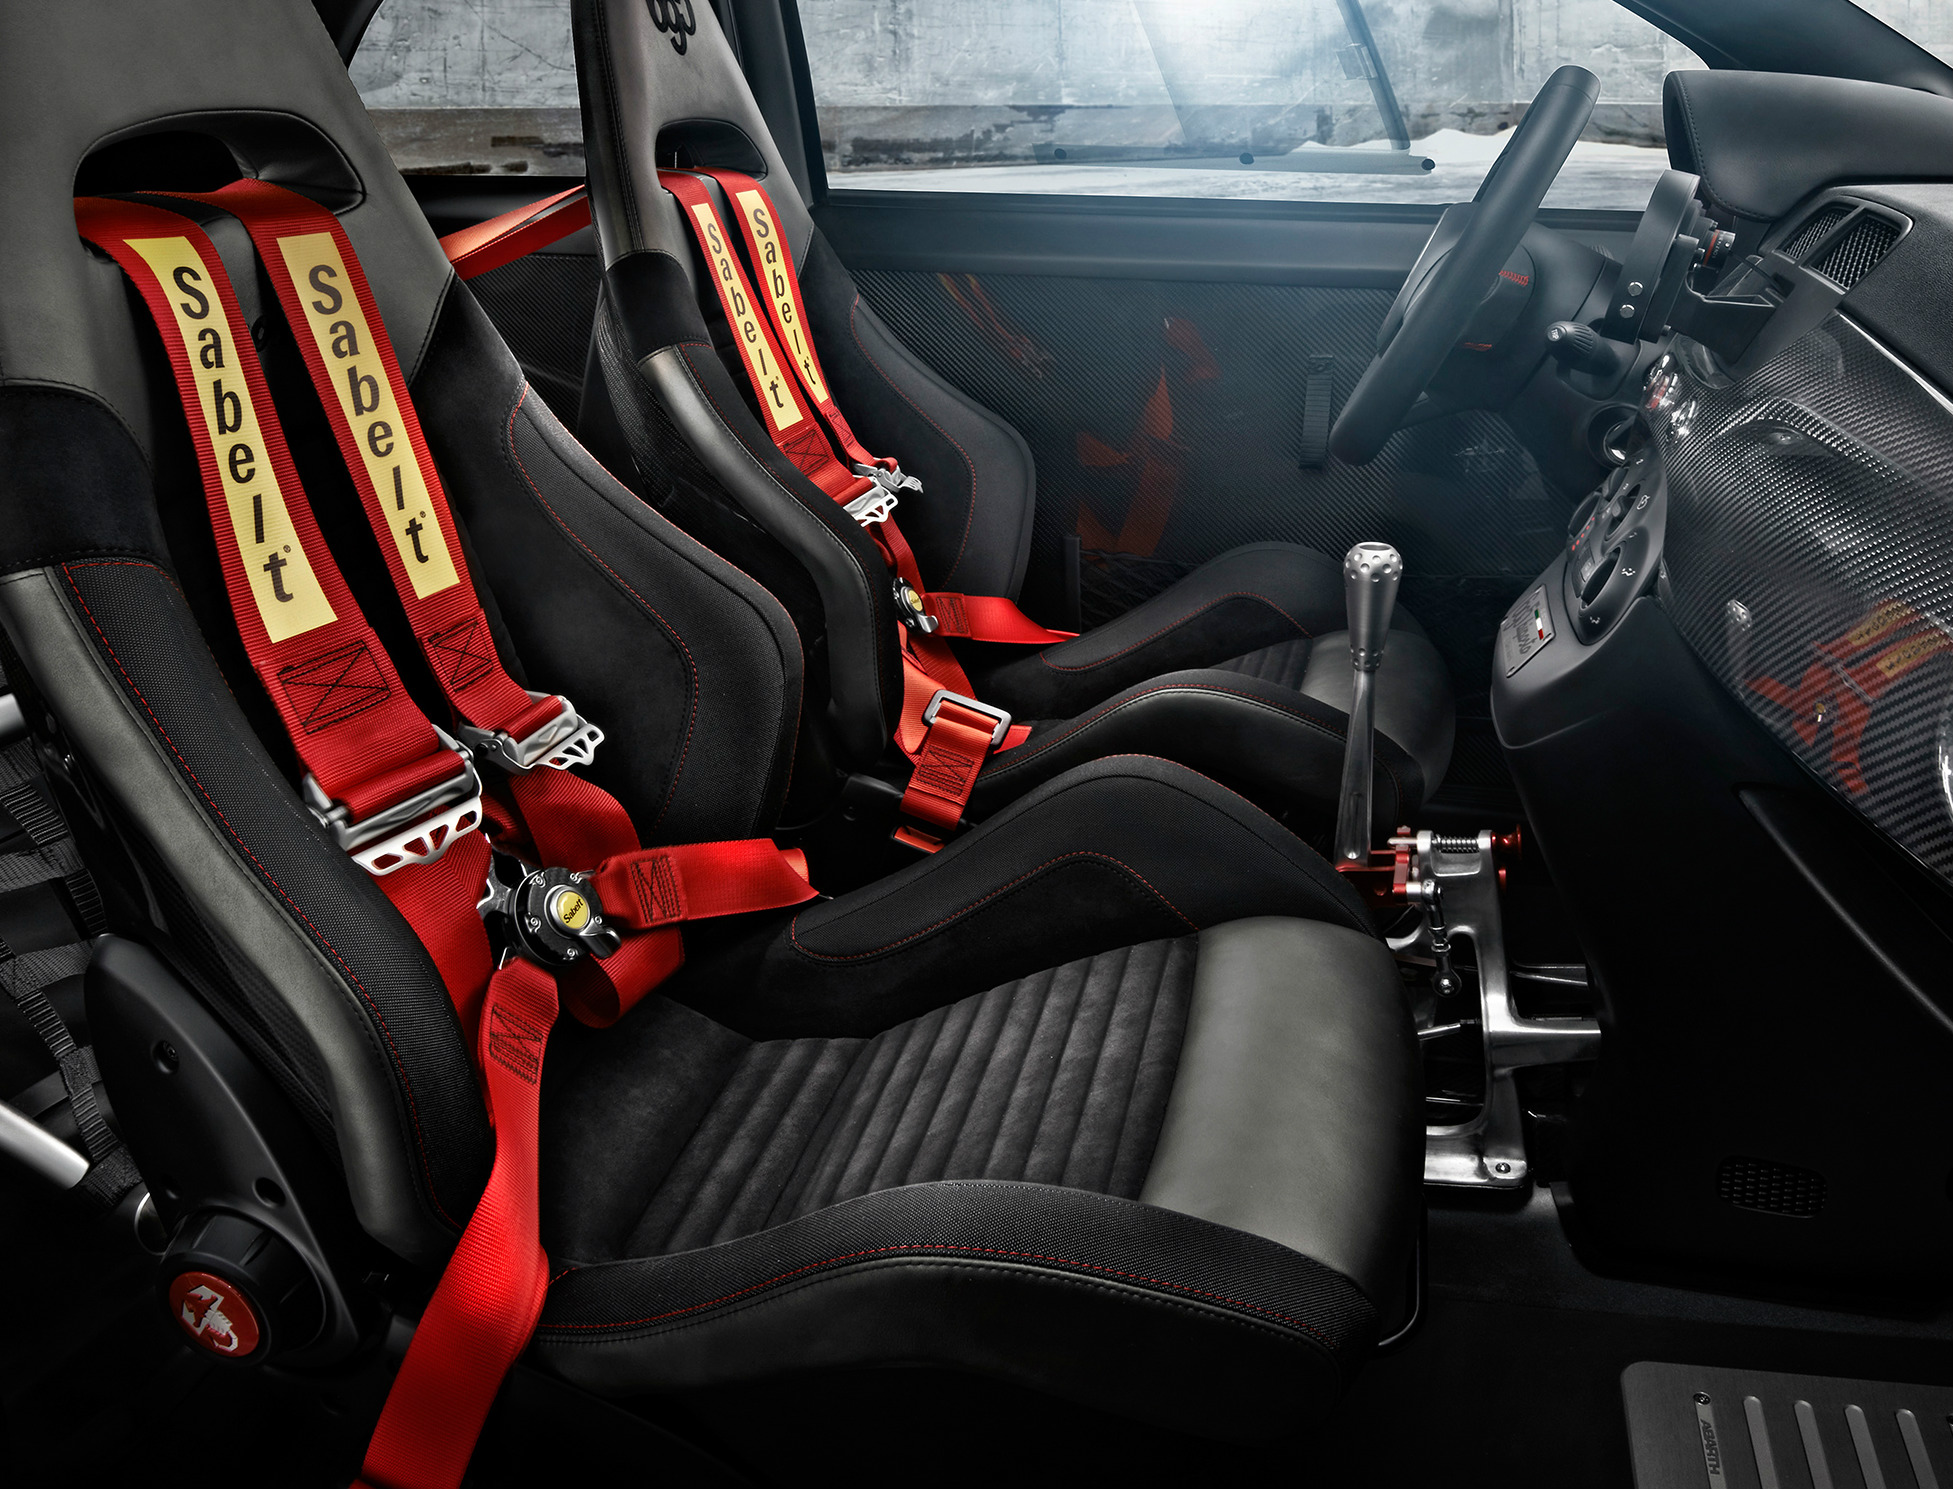 Can a fancy gearbox really make a car feel £8499 more exciting? (Picture © Abarth)